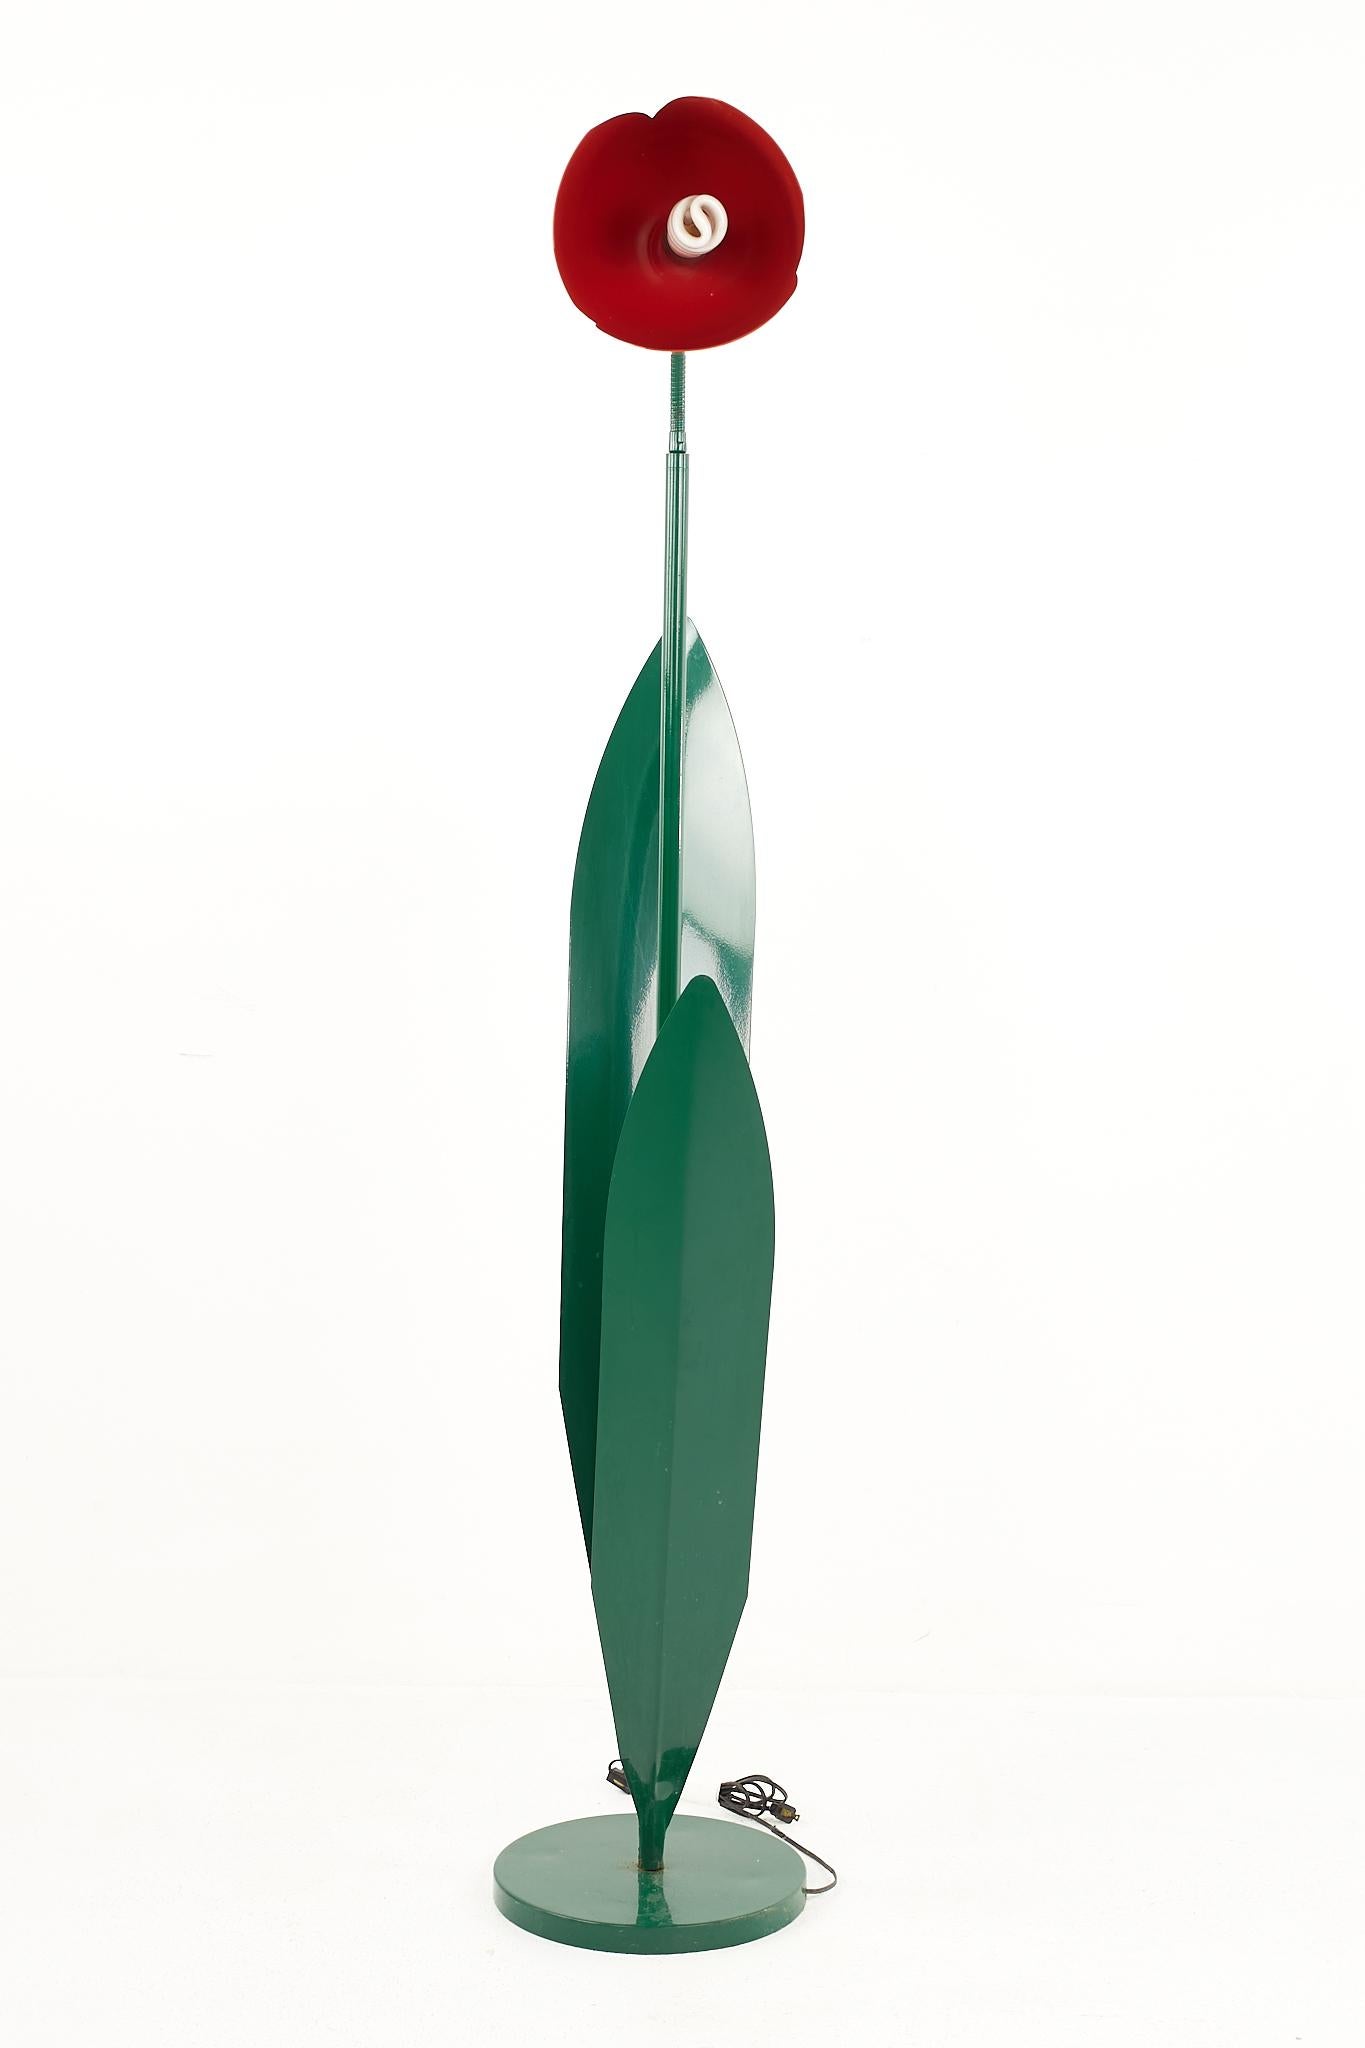 Peter Bliss Pop Art Postmodern Tulip Floor Lamp

The lamp measures: 16 wide x 12 deep x 64.5 inches high

We take our photos in a controlled lighting studio to show as much detail as possible. We do not photoshop out blemishes. 

We keep you fully